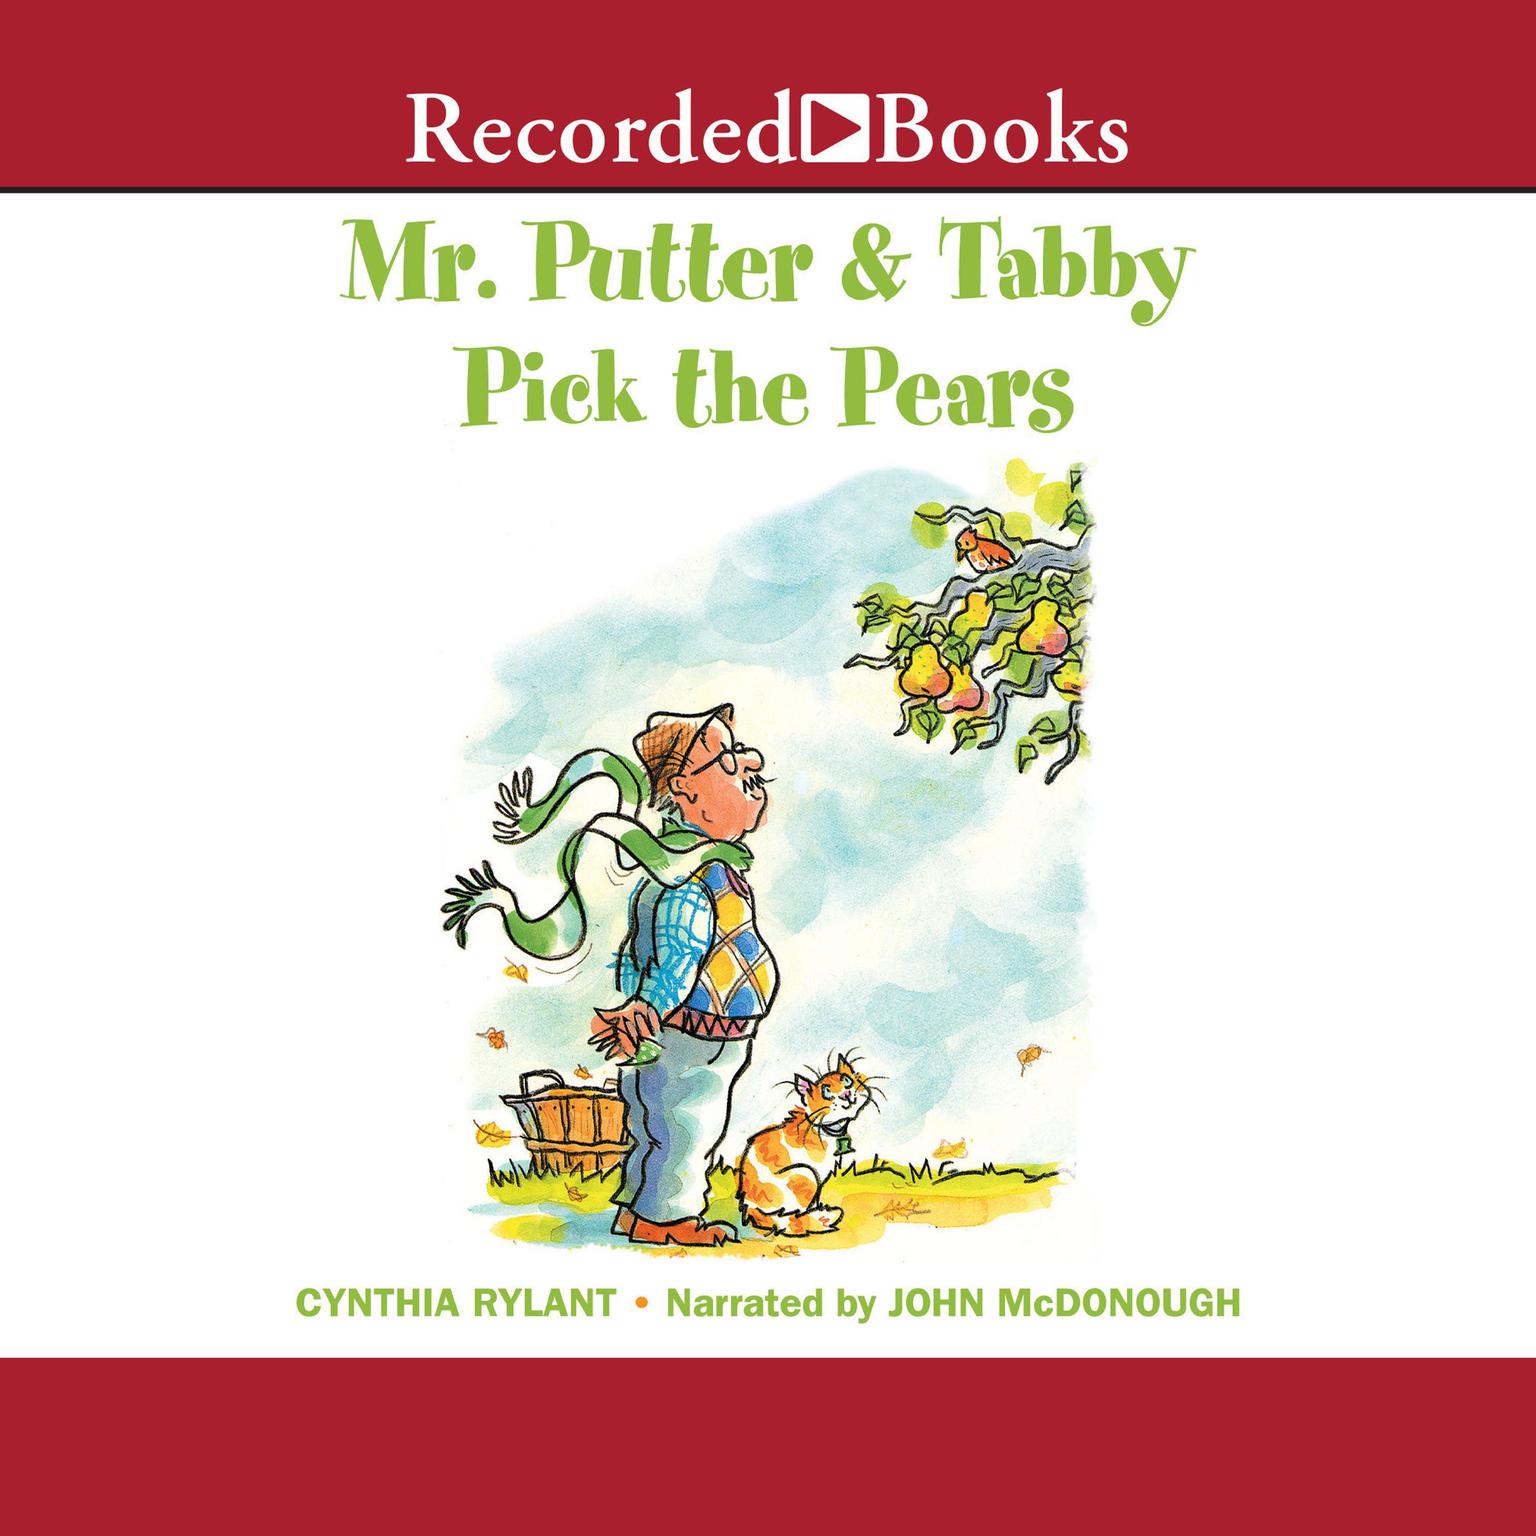 Mr. Putter & Tabby Pick the Pears Audiobook, by Cynthia Rylant